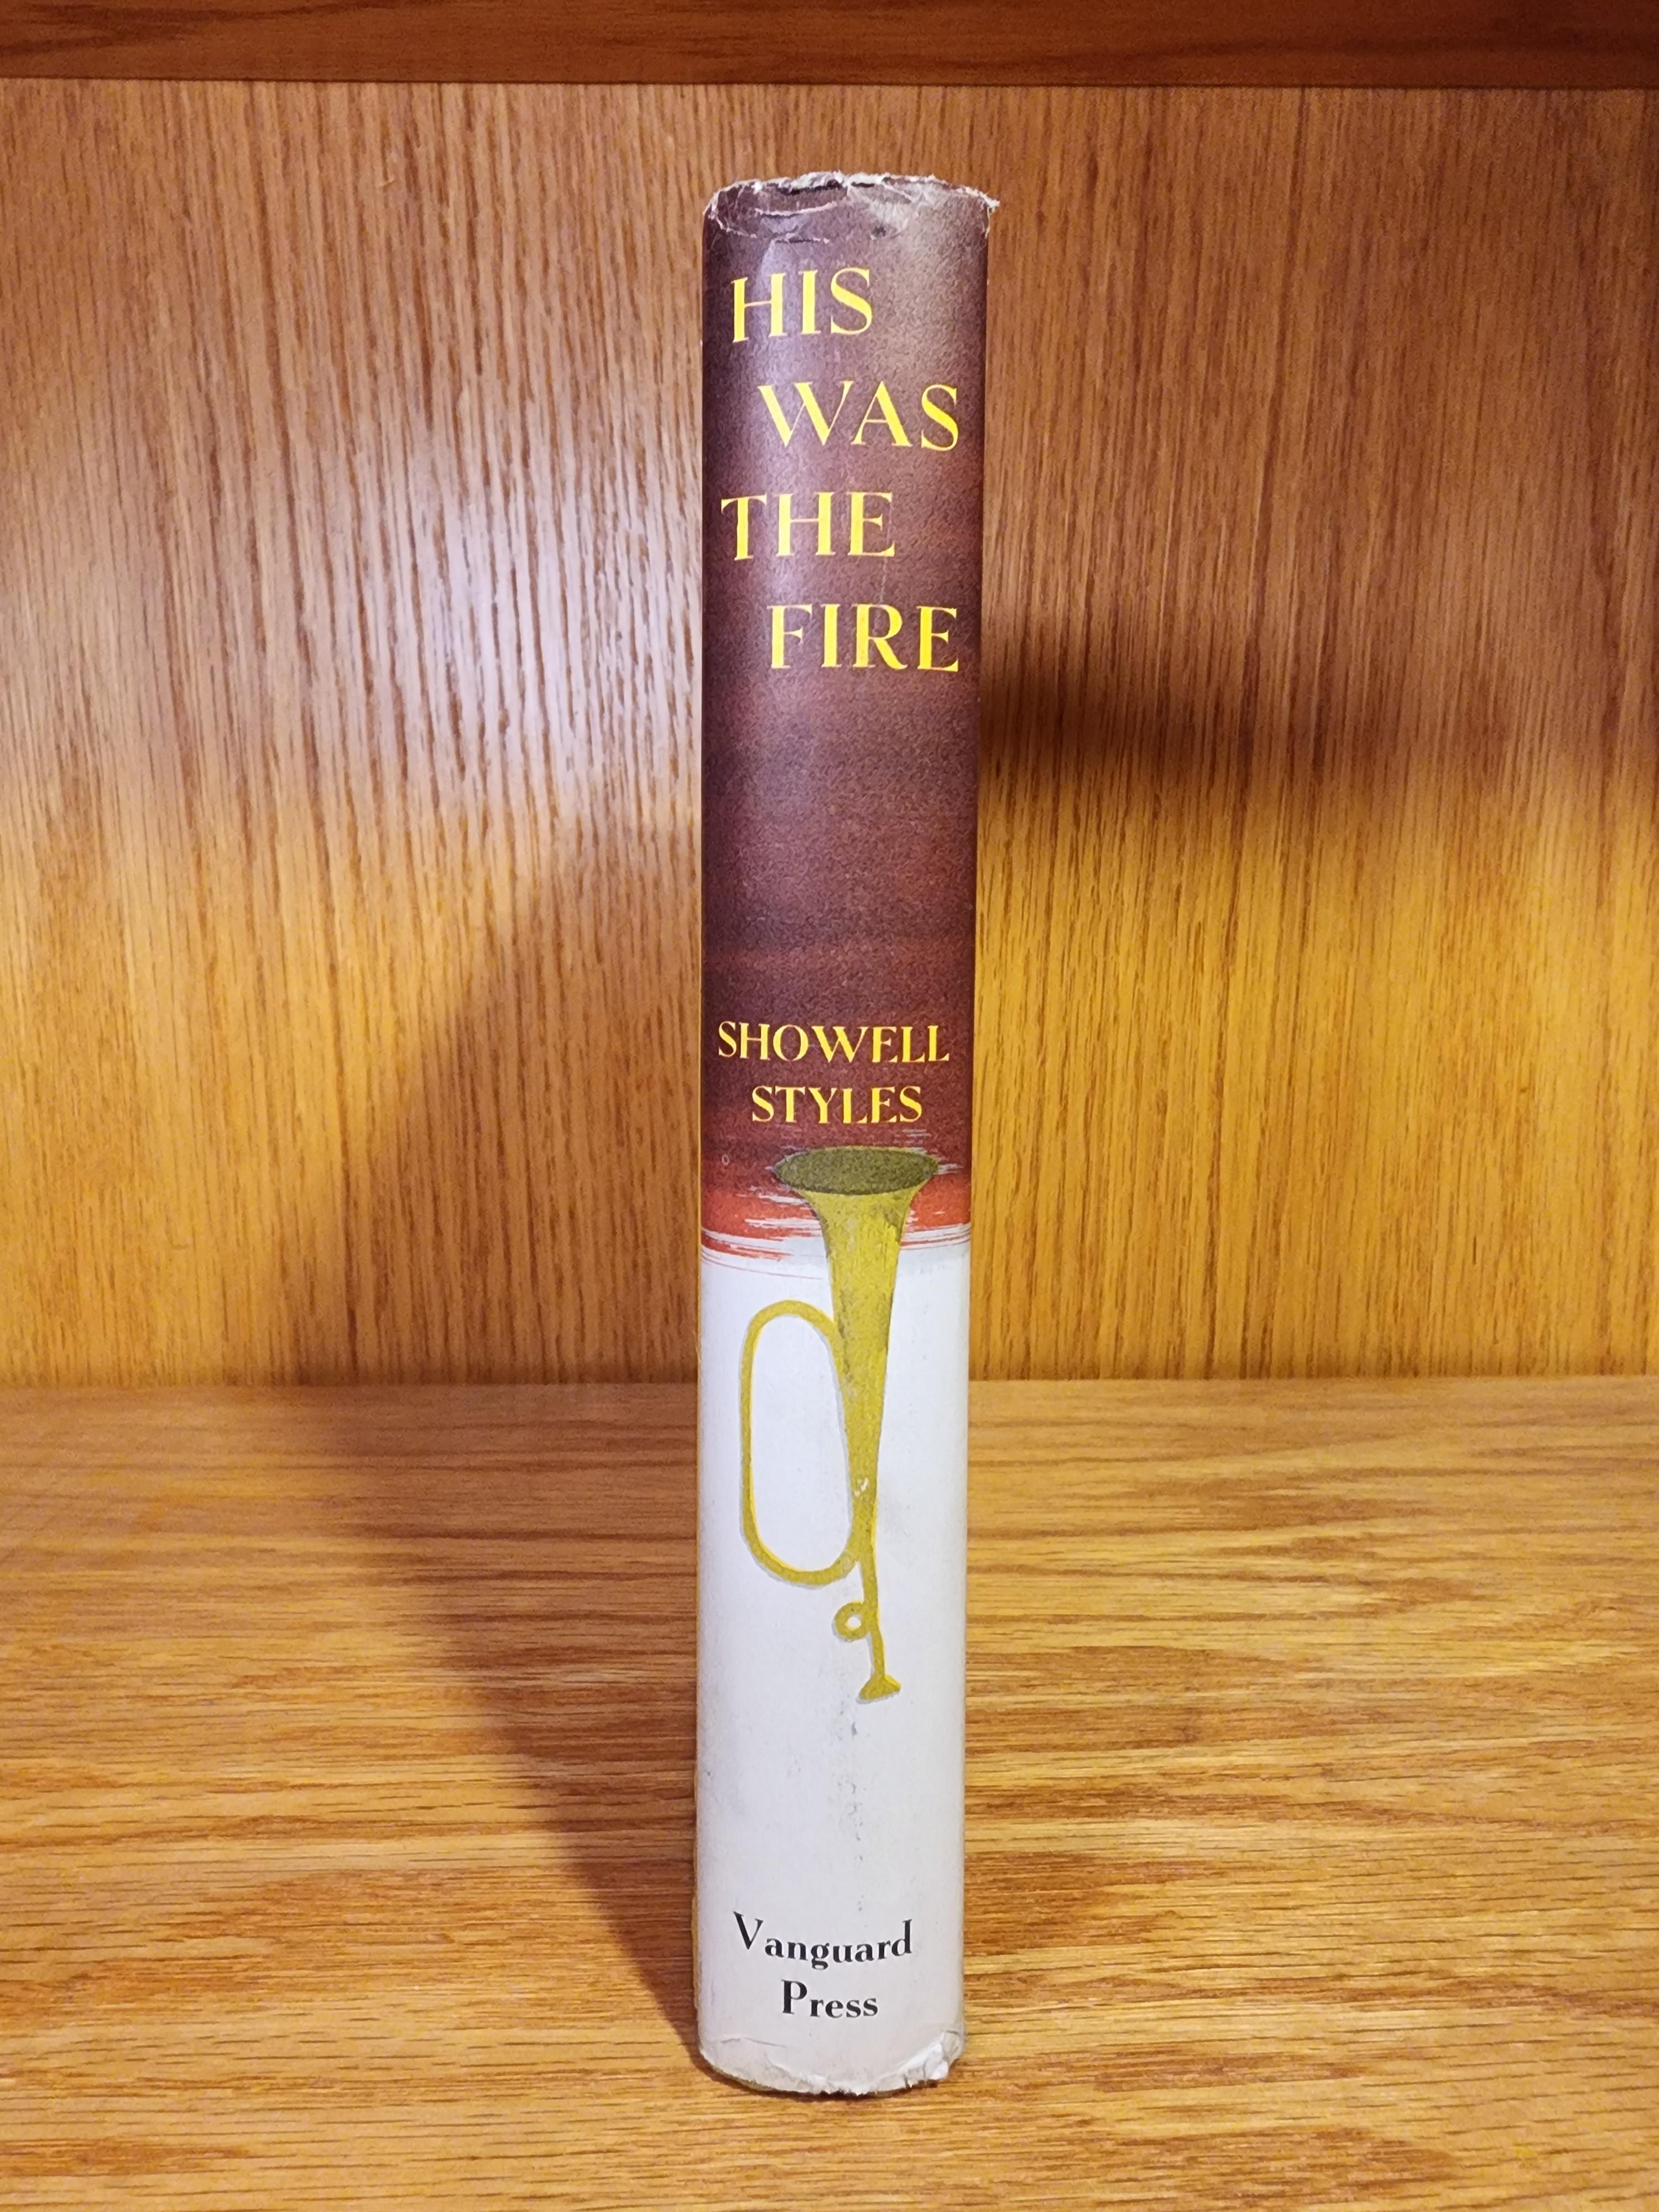 His Was The Fire Showell Styles 1956- HC, DJ, Hardcover